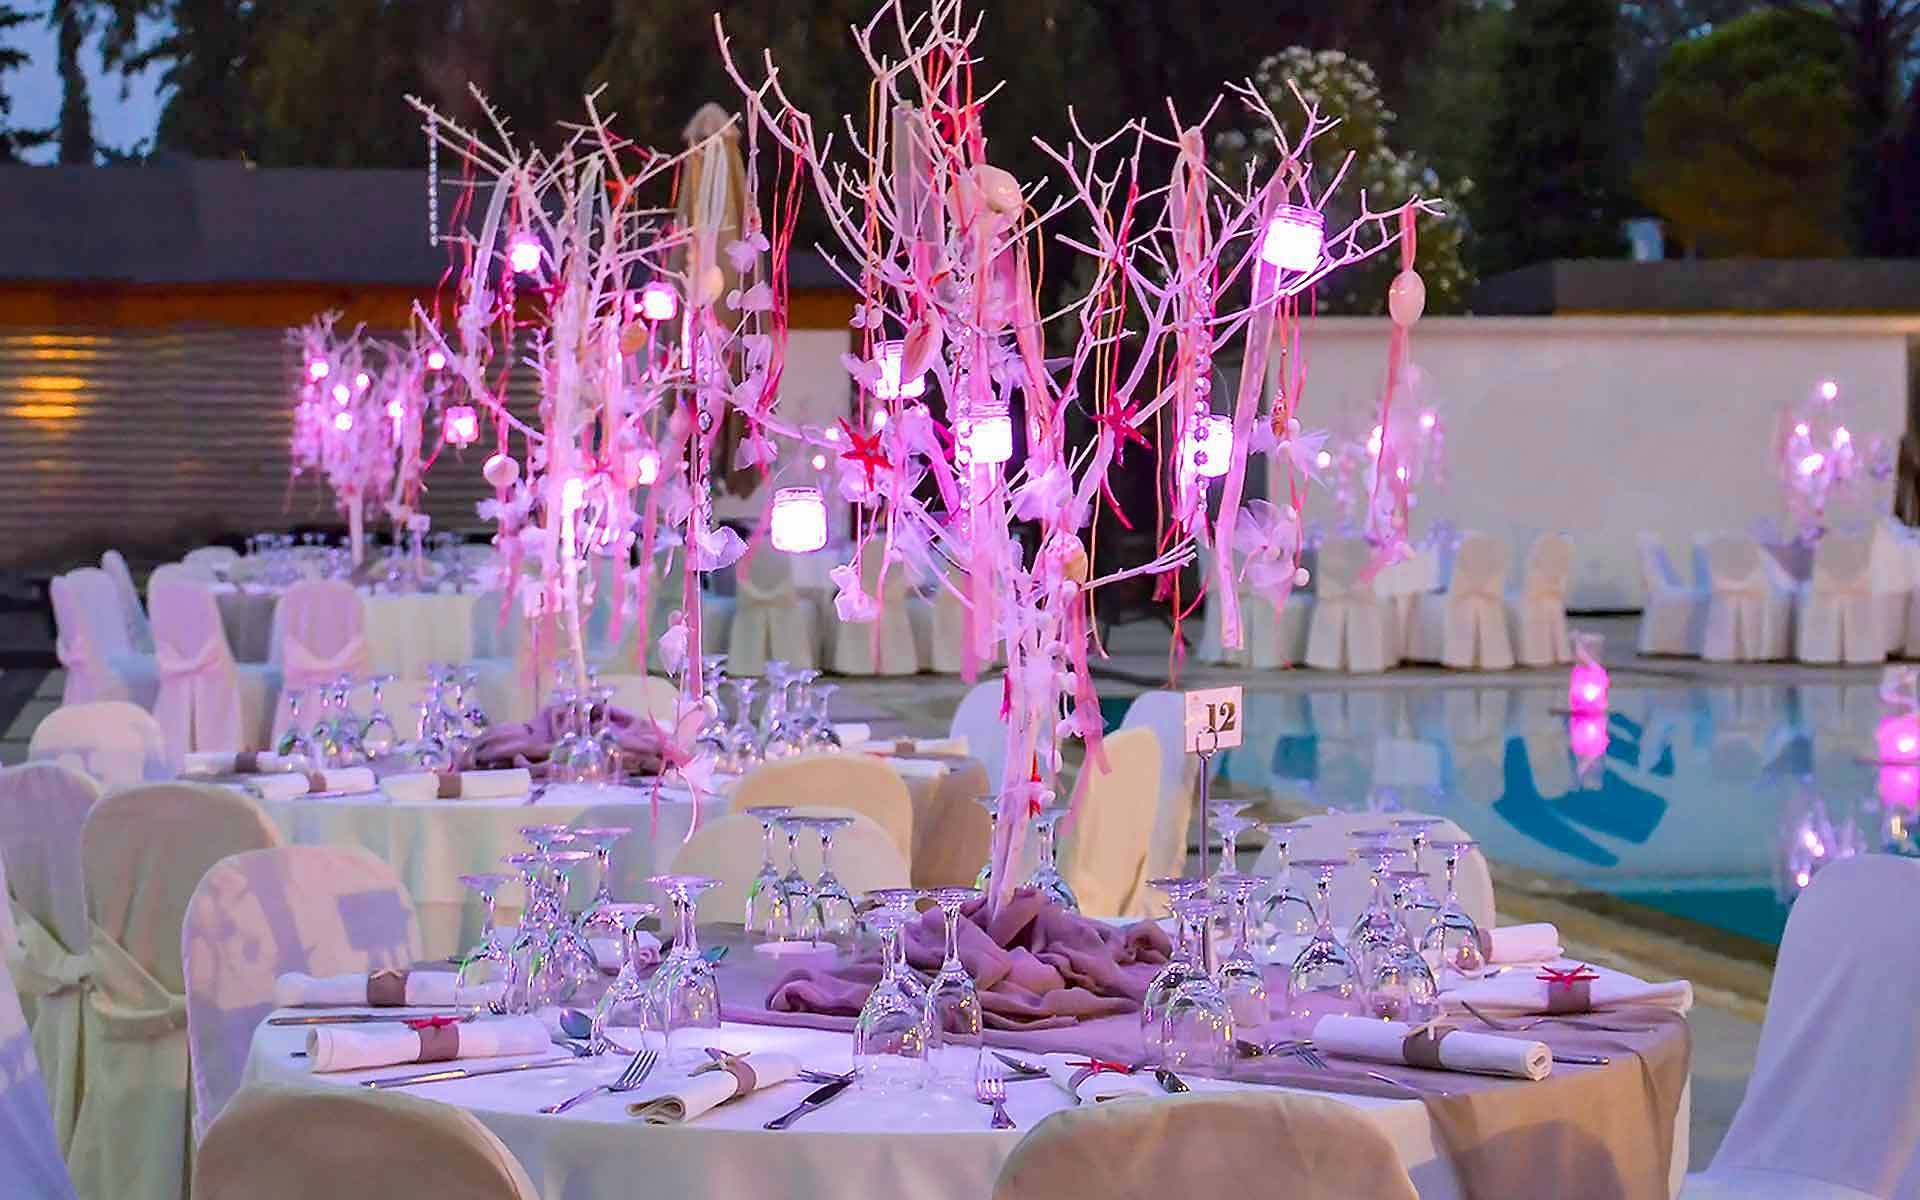 Corals In Trees In Purple Lighting As A Centerpiece In A Beach Wedding by Rogdaki Events Trademark